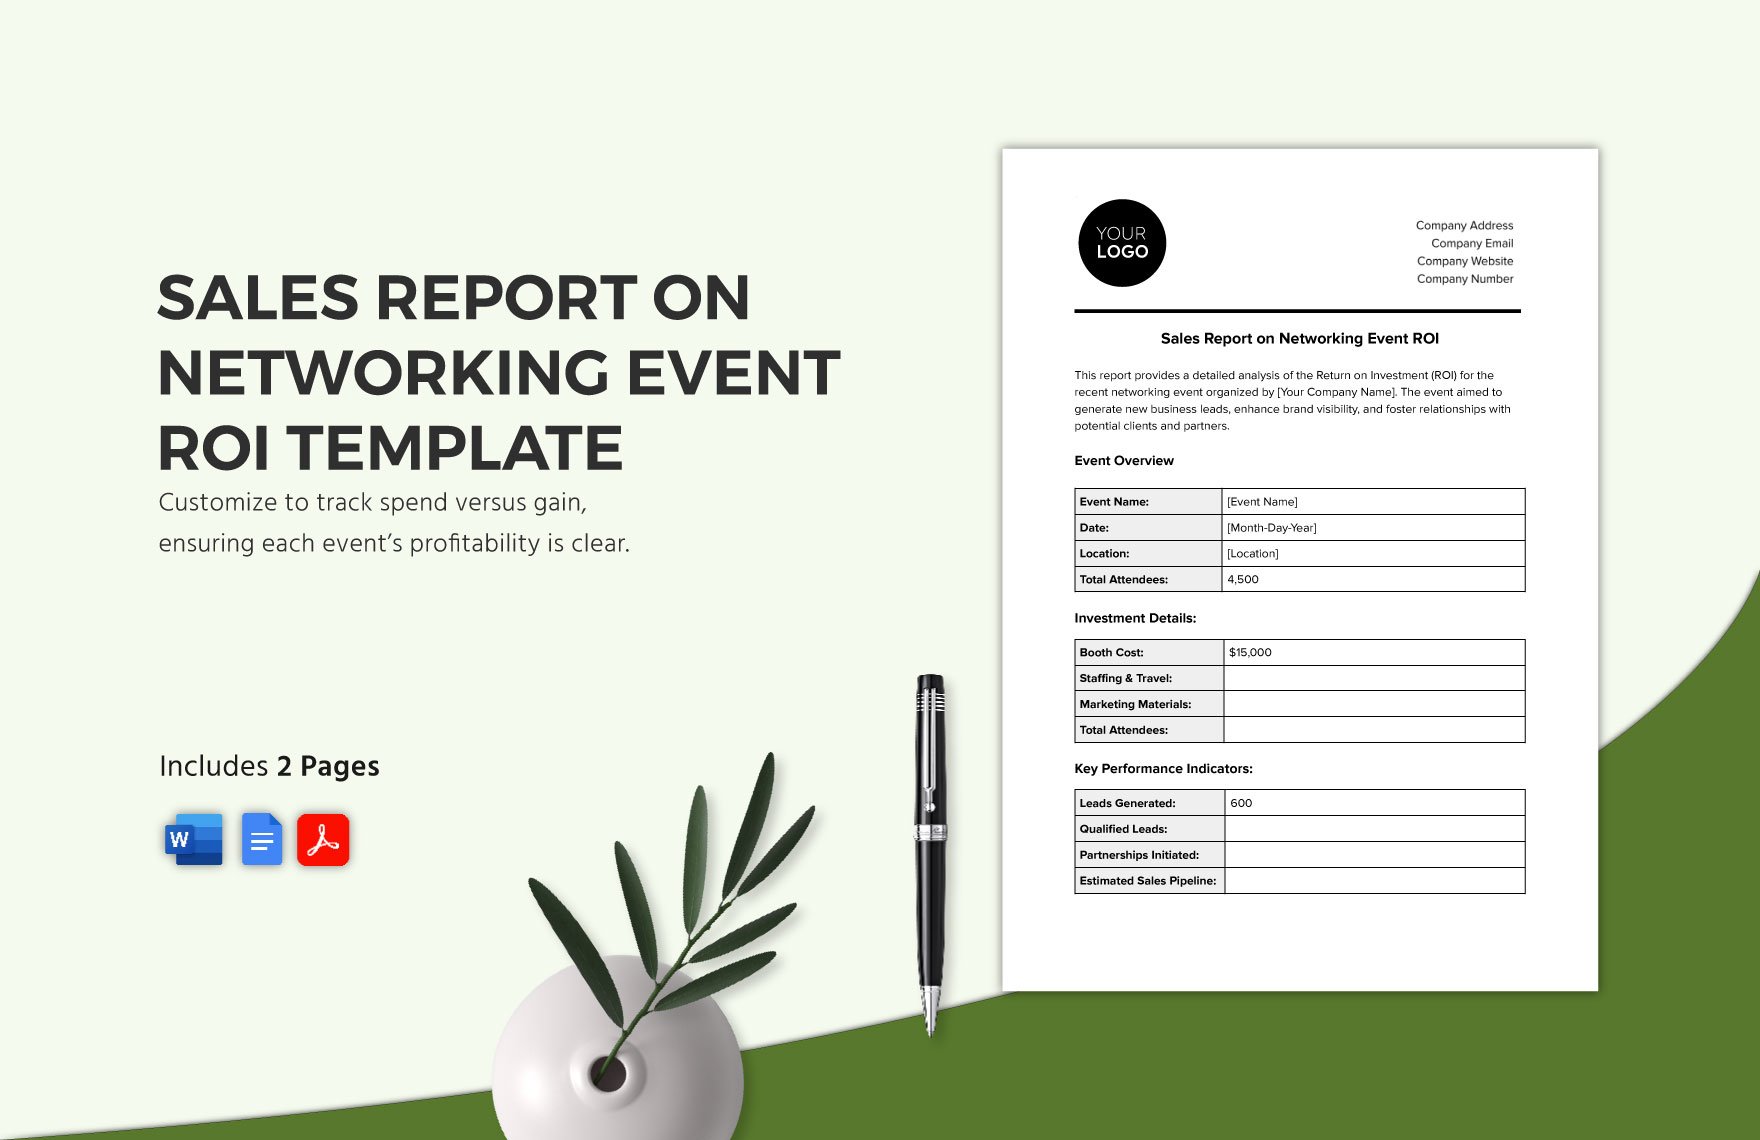 Sales Report on Networking Event ROI Template